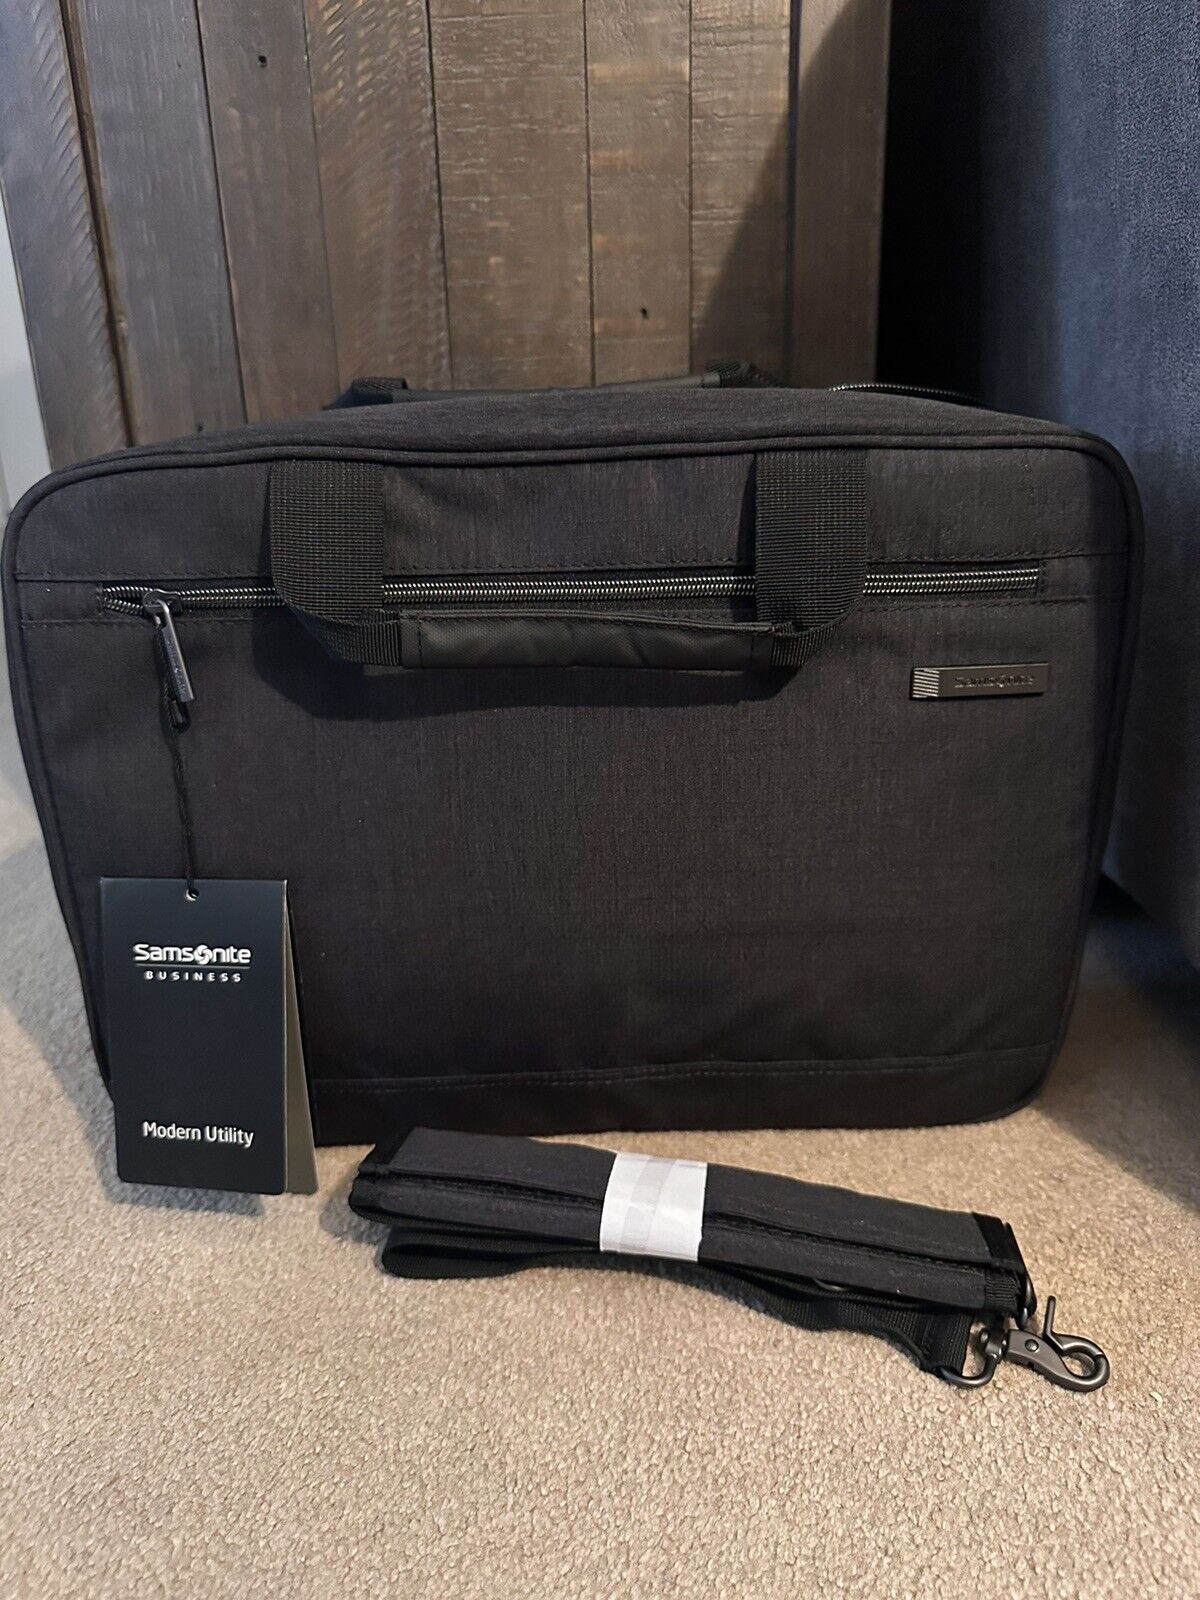 Samsonite Modern Utility Top Loading Briefcase in Heathered - Charcoal